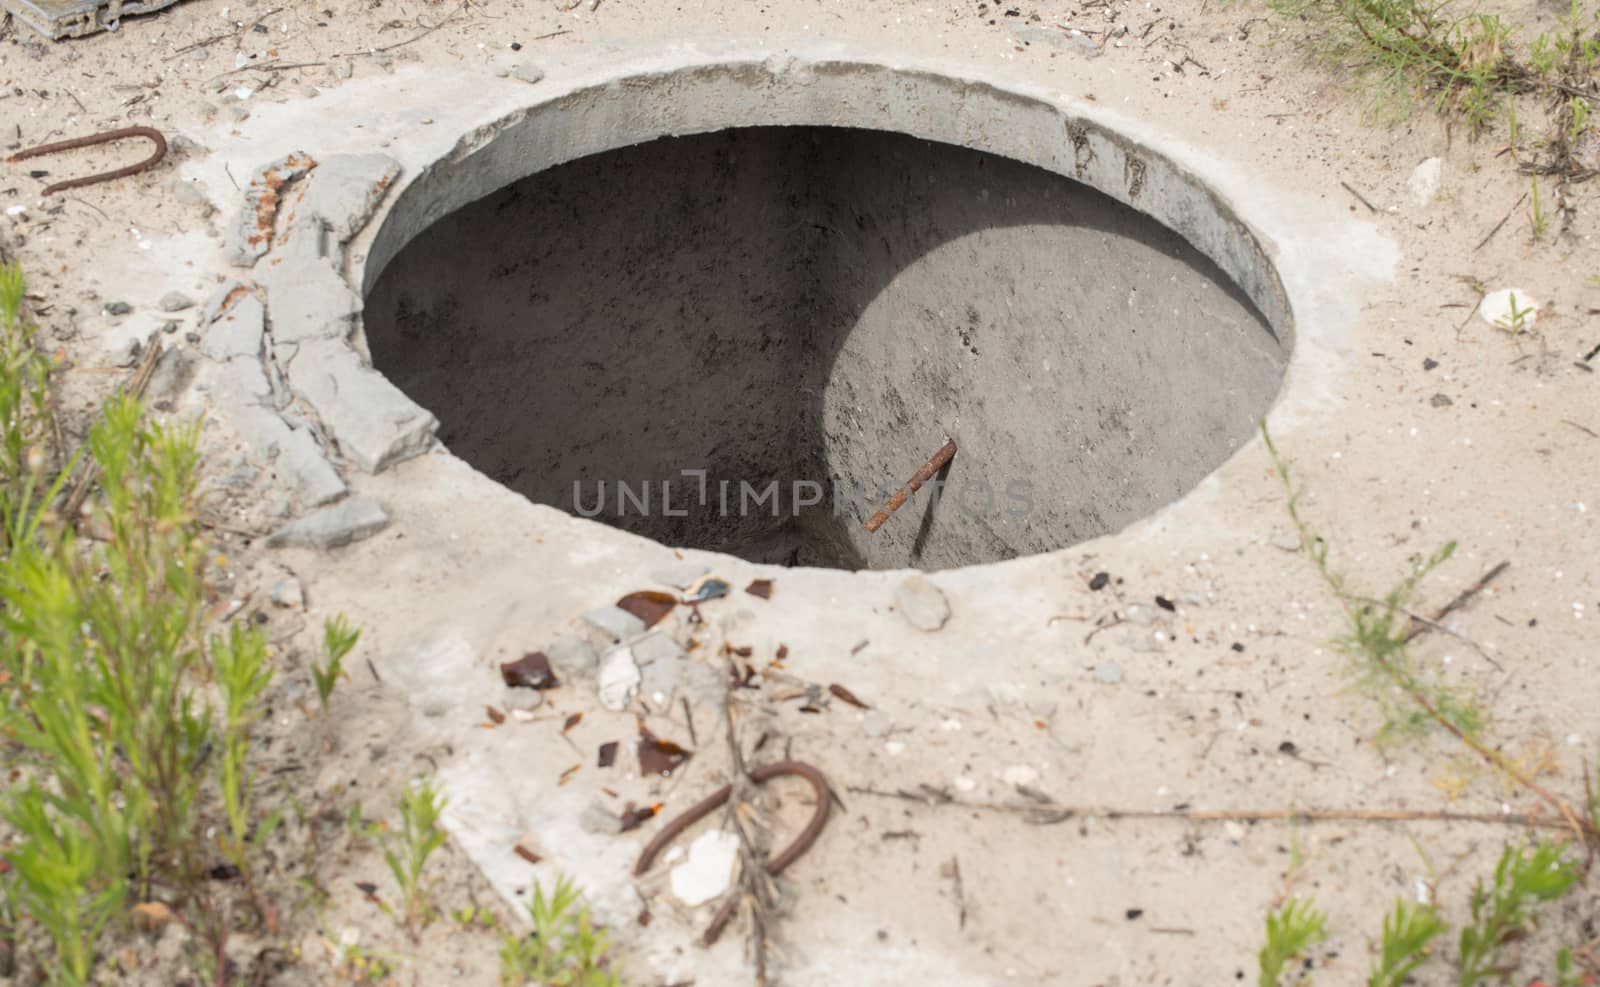 Manhole without cover in the concrete block by rootstocks